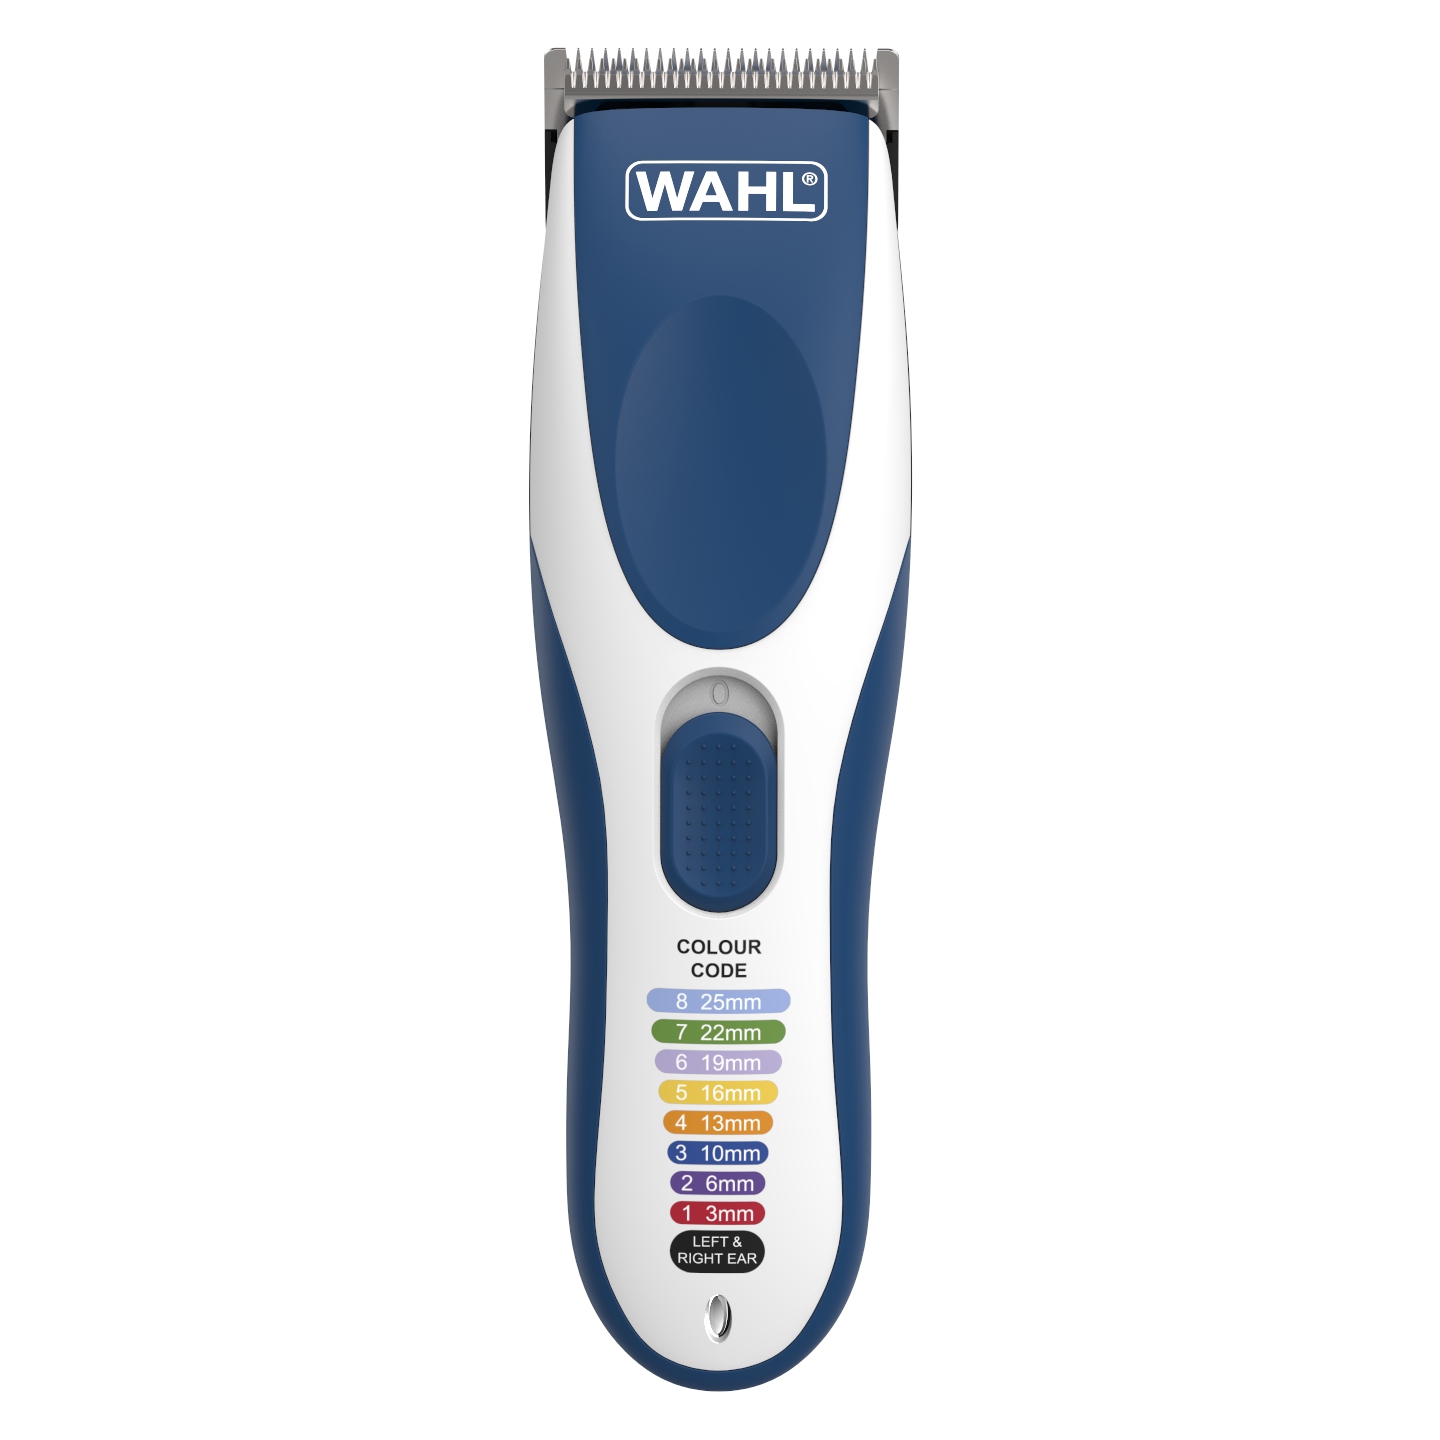 wahl home haircutting made simple pdf